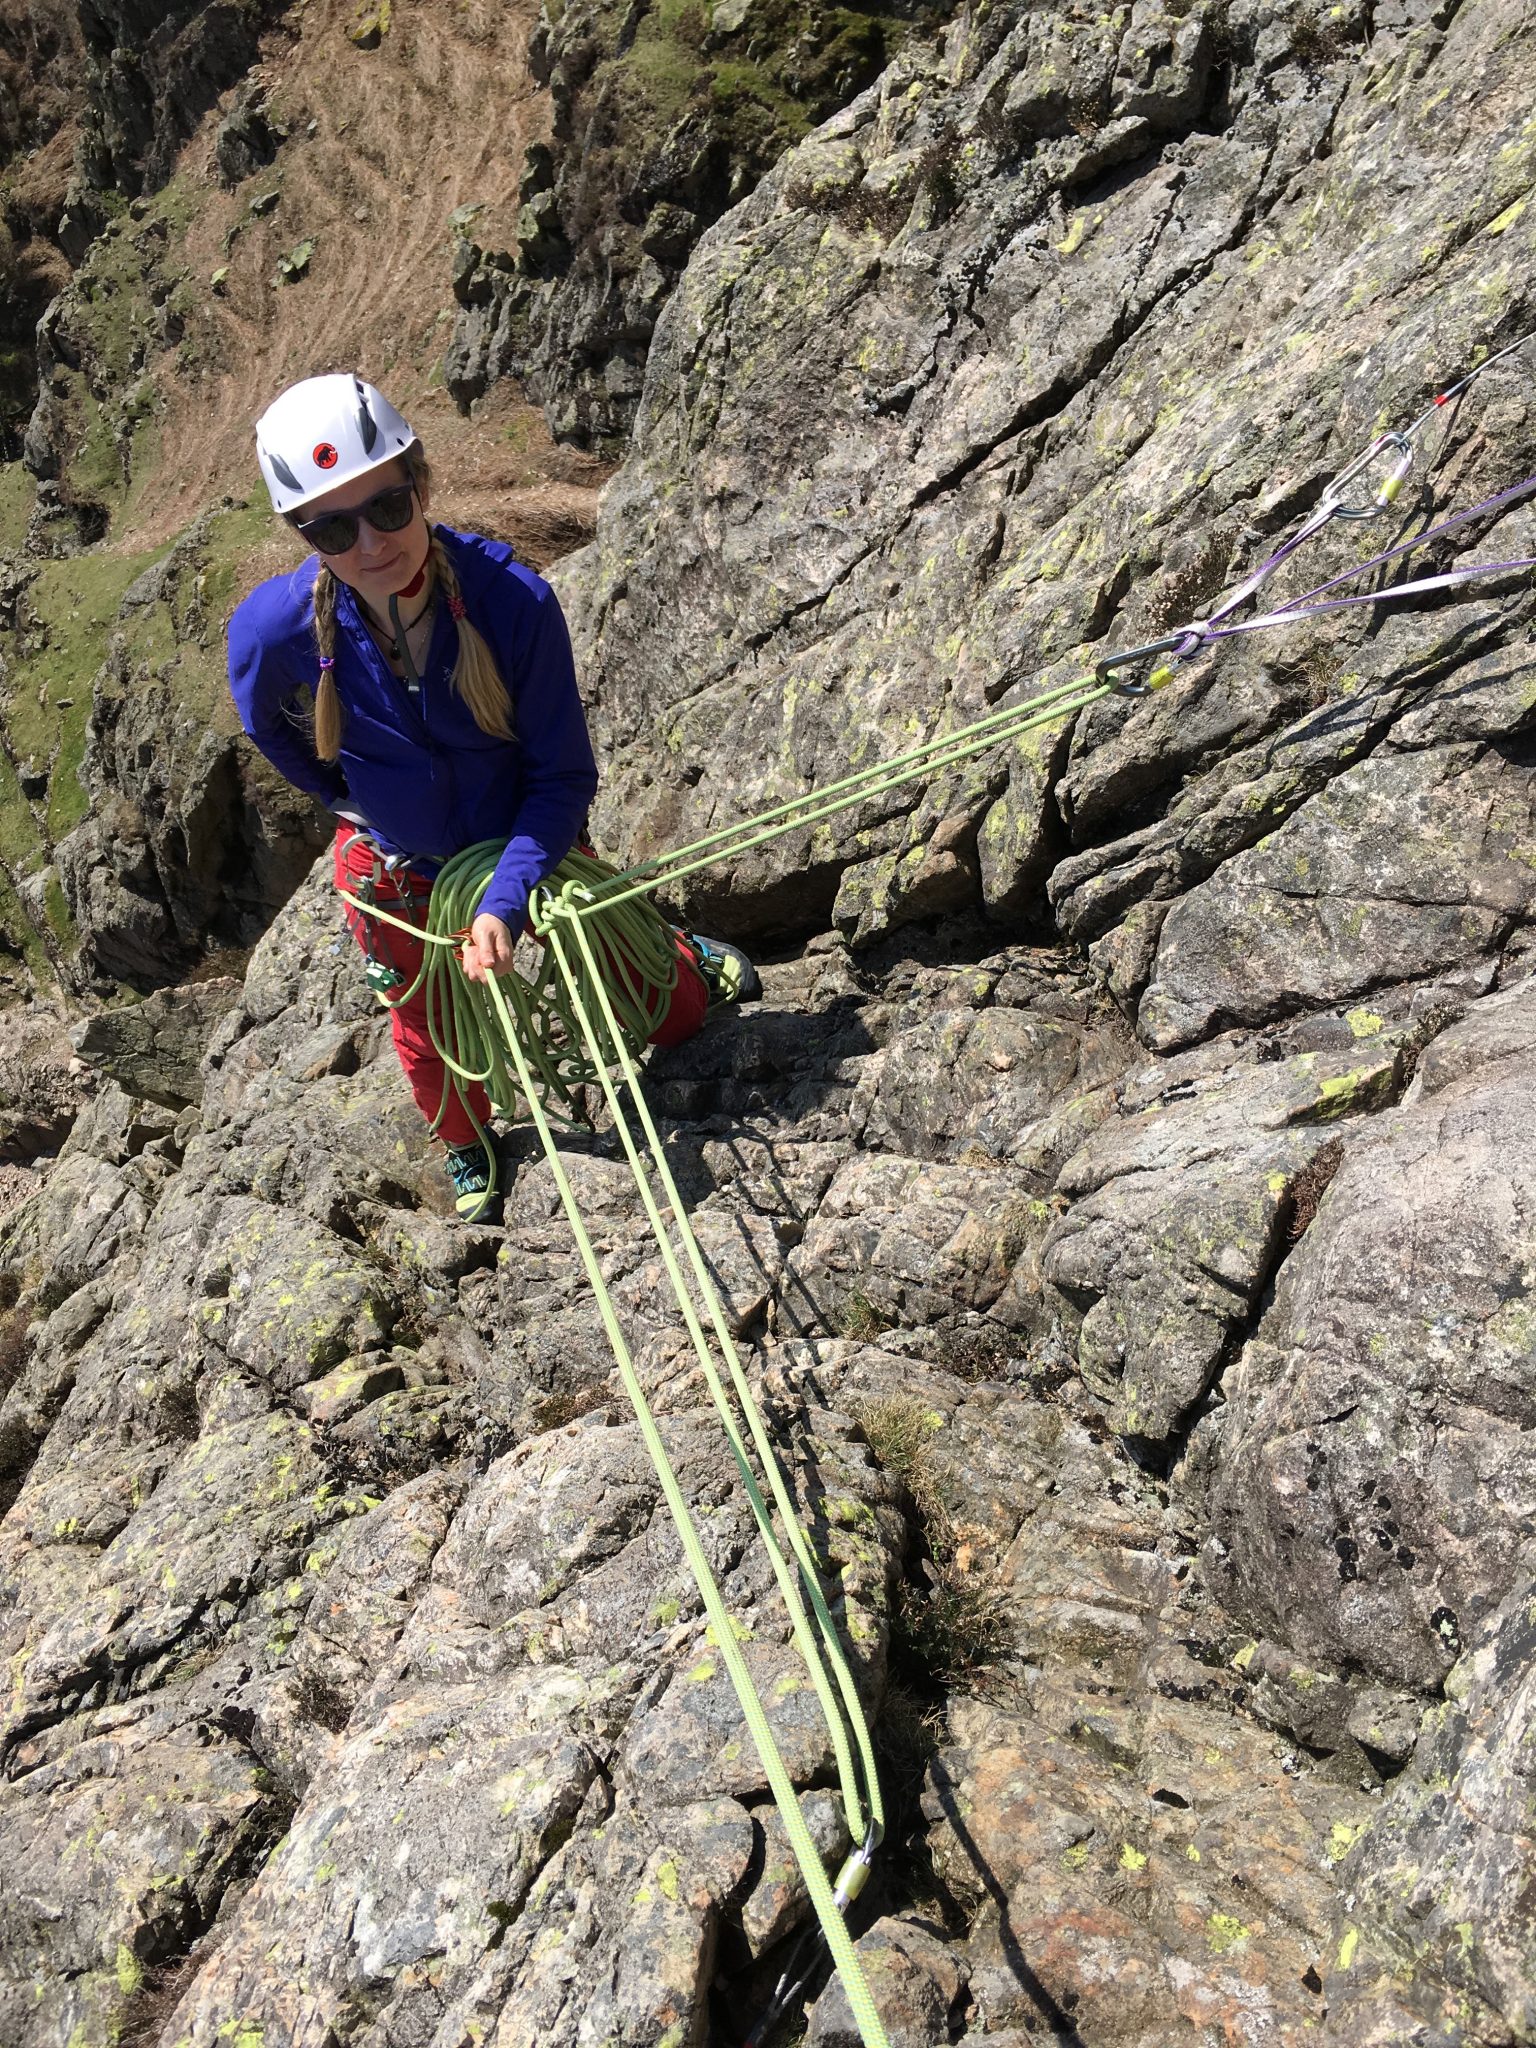 A rock climber securely anchored to the rock at her belay on a multi-pitch rock climbing course in the Lake District